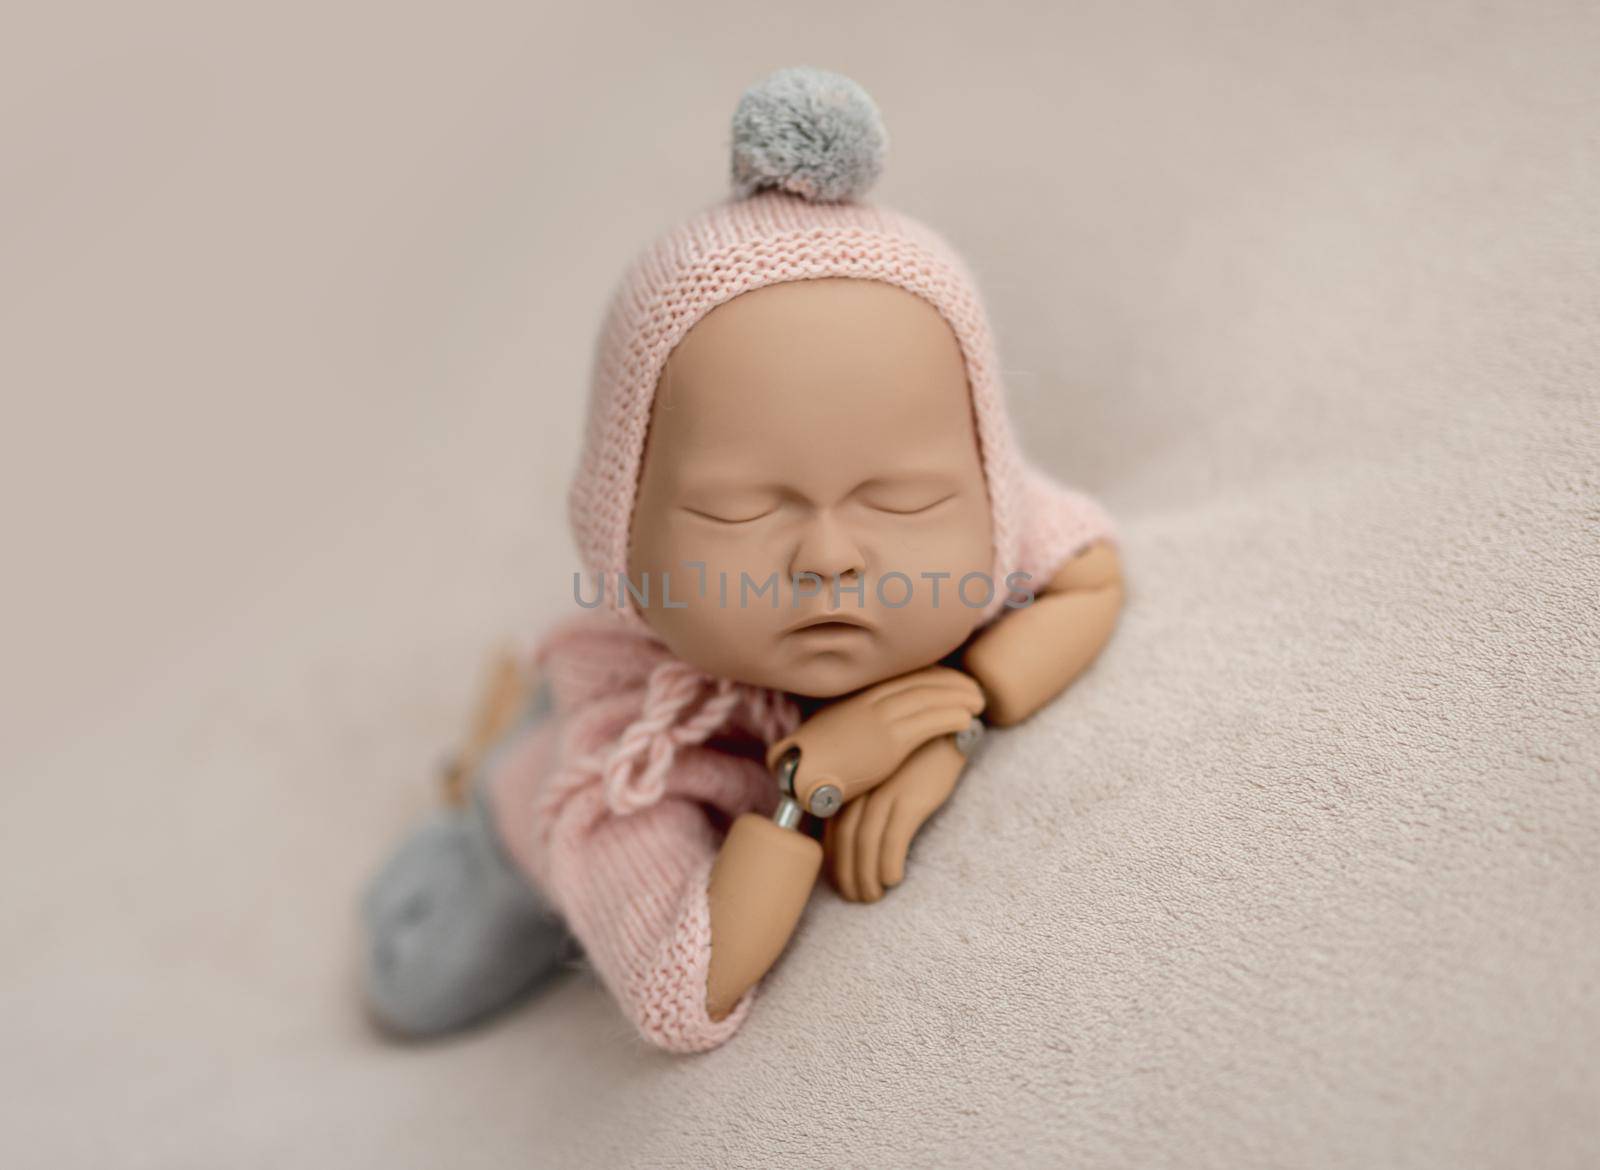 Precisely accurate mannequin of newborn in a knitted suit for photo practicing